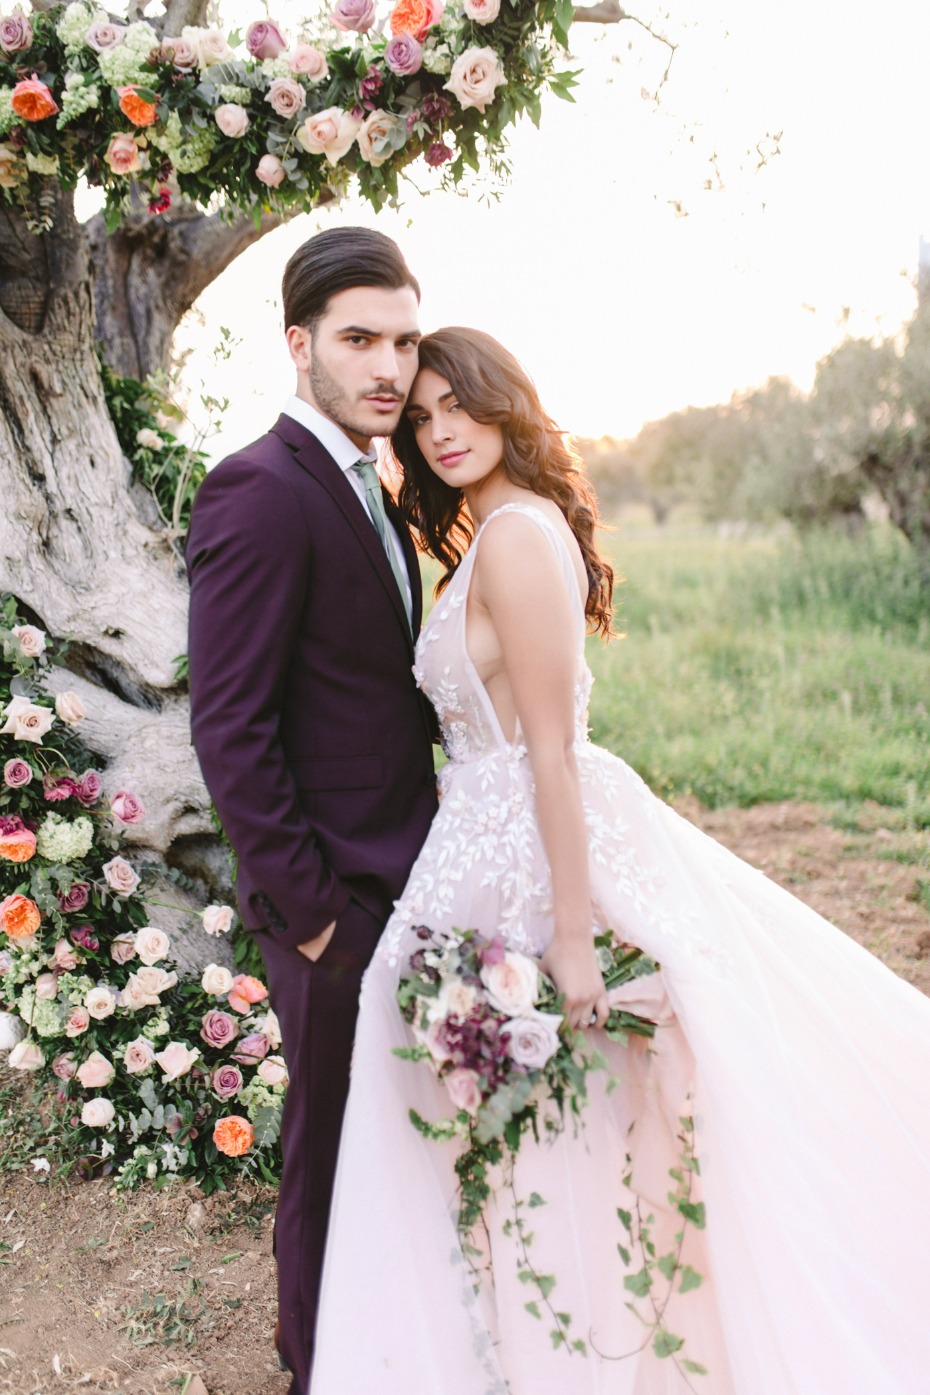 Olive Trees and Garden Roses wedding ideas